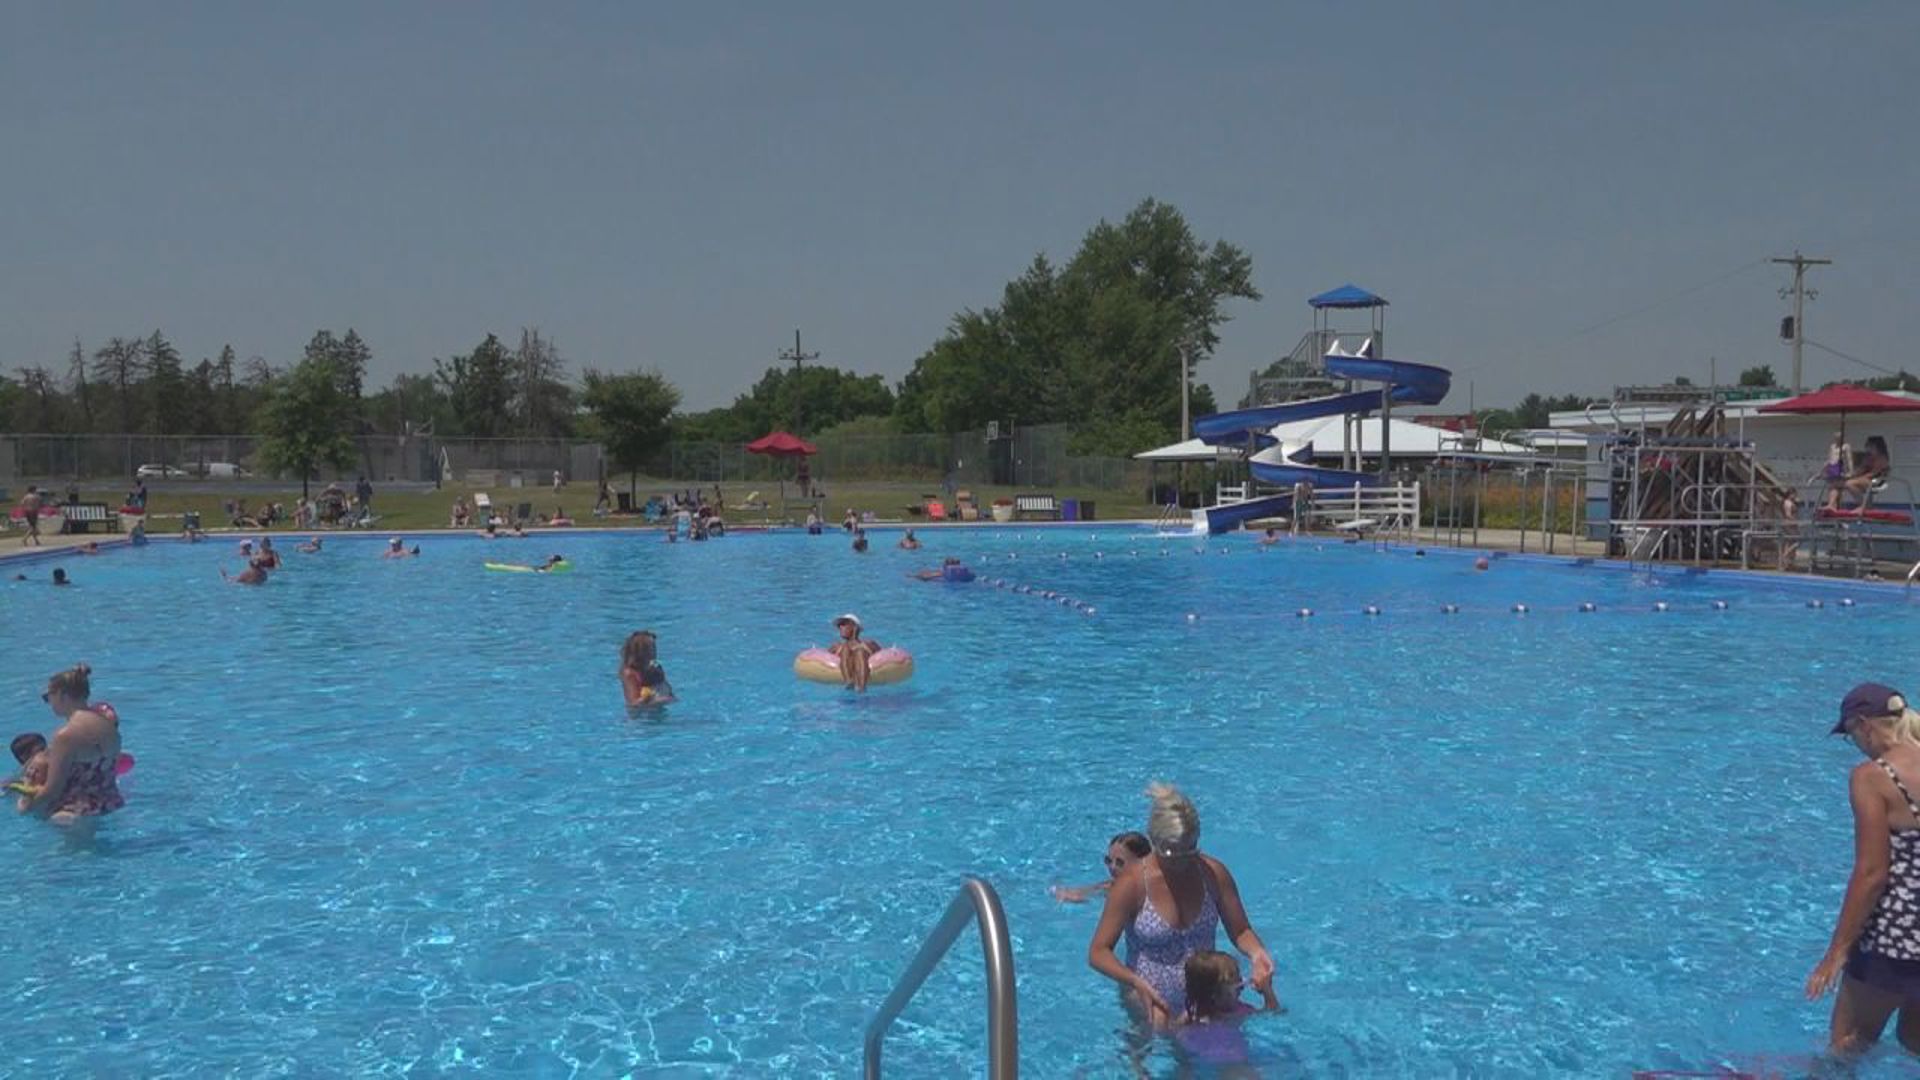 People at a York County pool are staying cool as the high temperatures settle in, no matter what role they play.